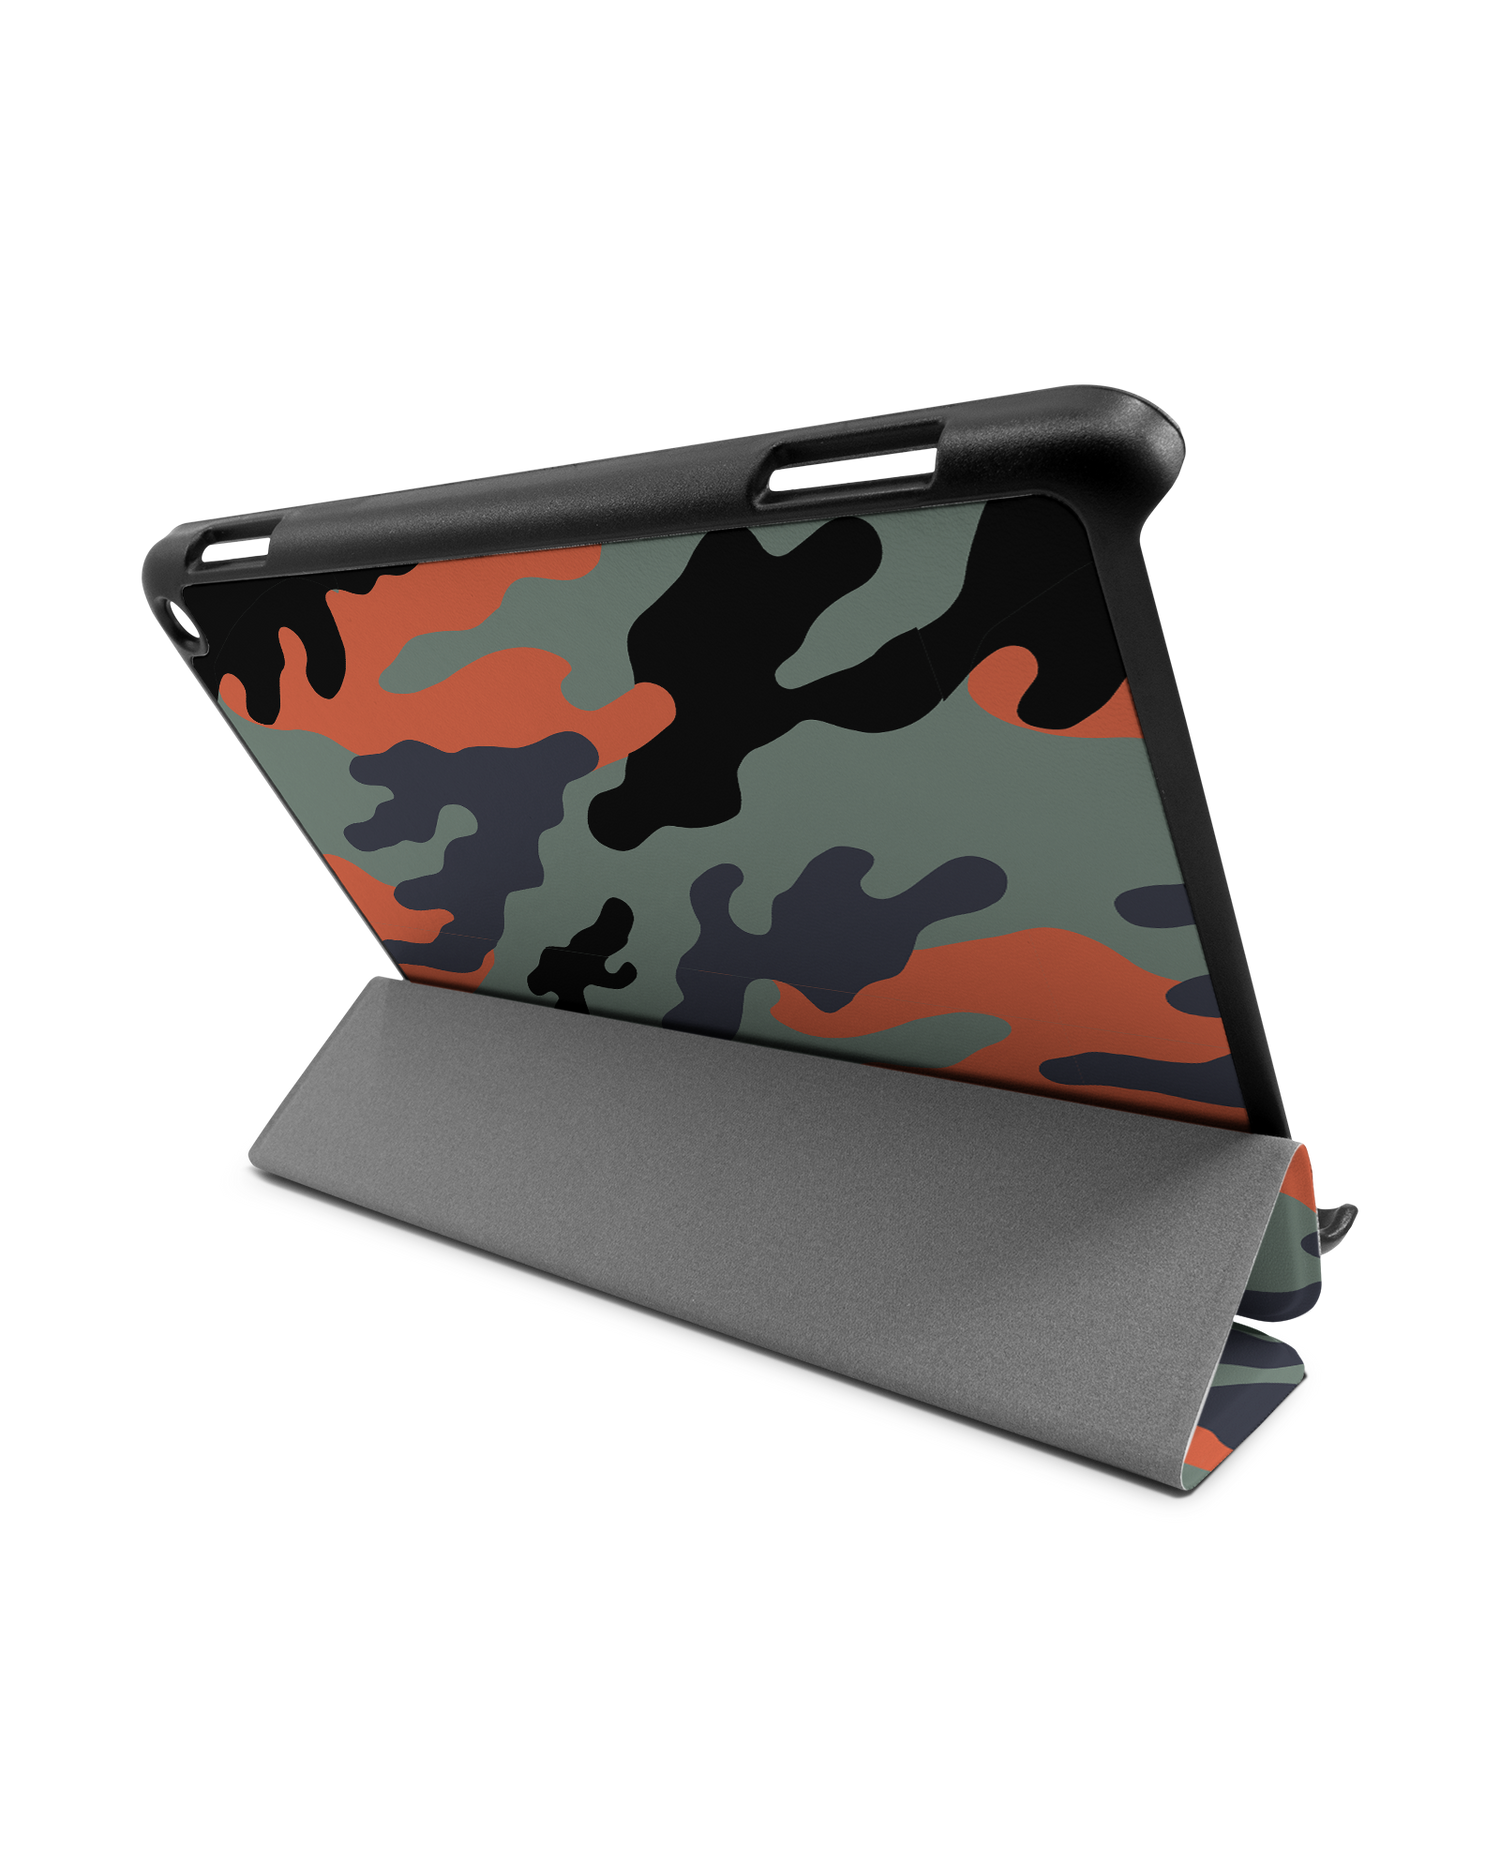 Camo Sunset Tablet Smart Case for Amazon Fire HD 8 (2022), Amazon Fire HD 8 Plus (2022), Amazon Fire HD 8 (2020), Amazon Fire HD 8 Plus (2020): Used as Stand